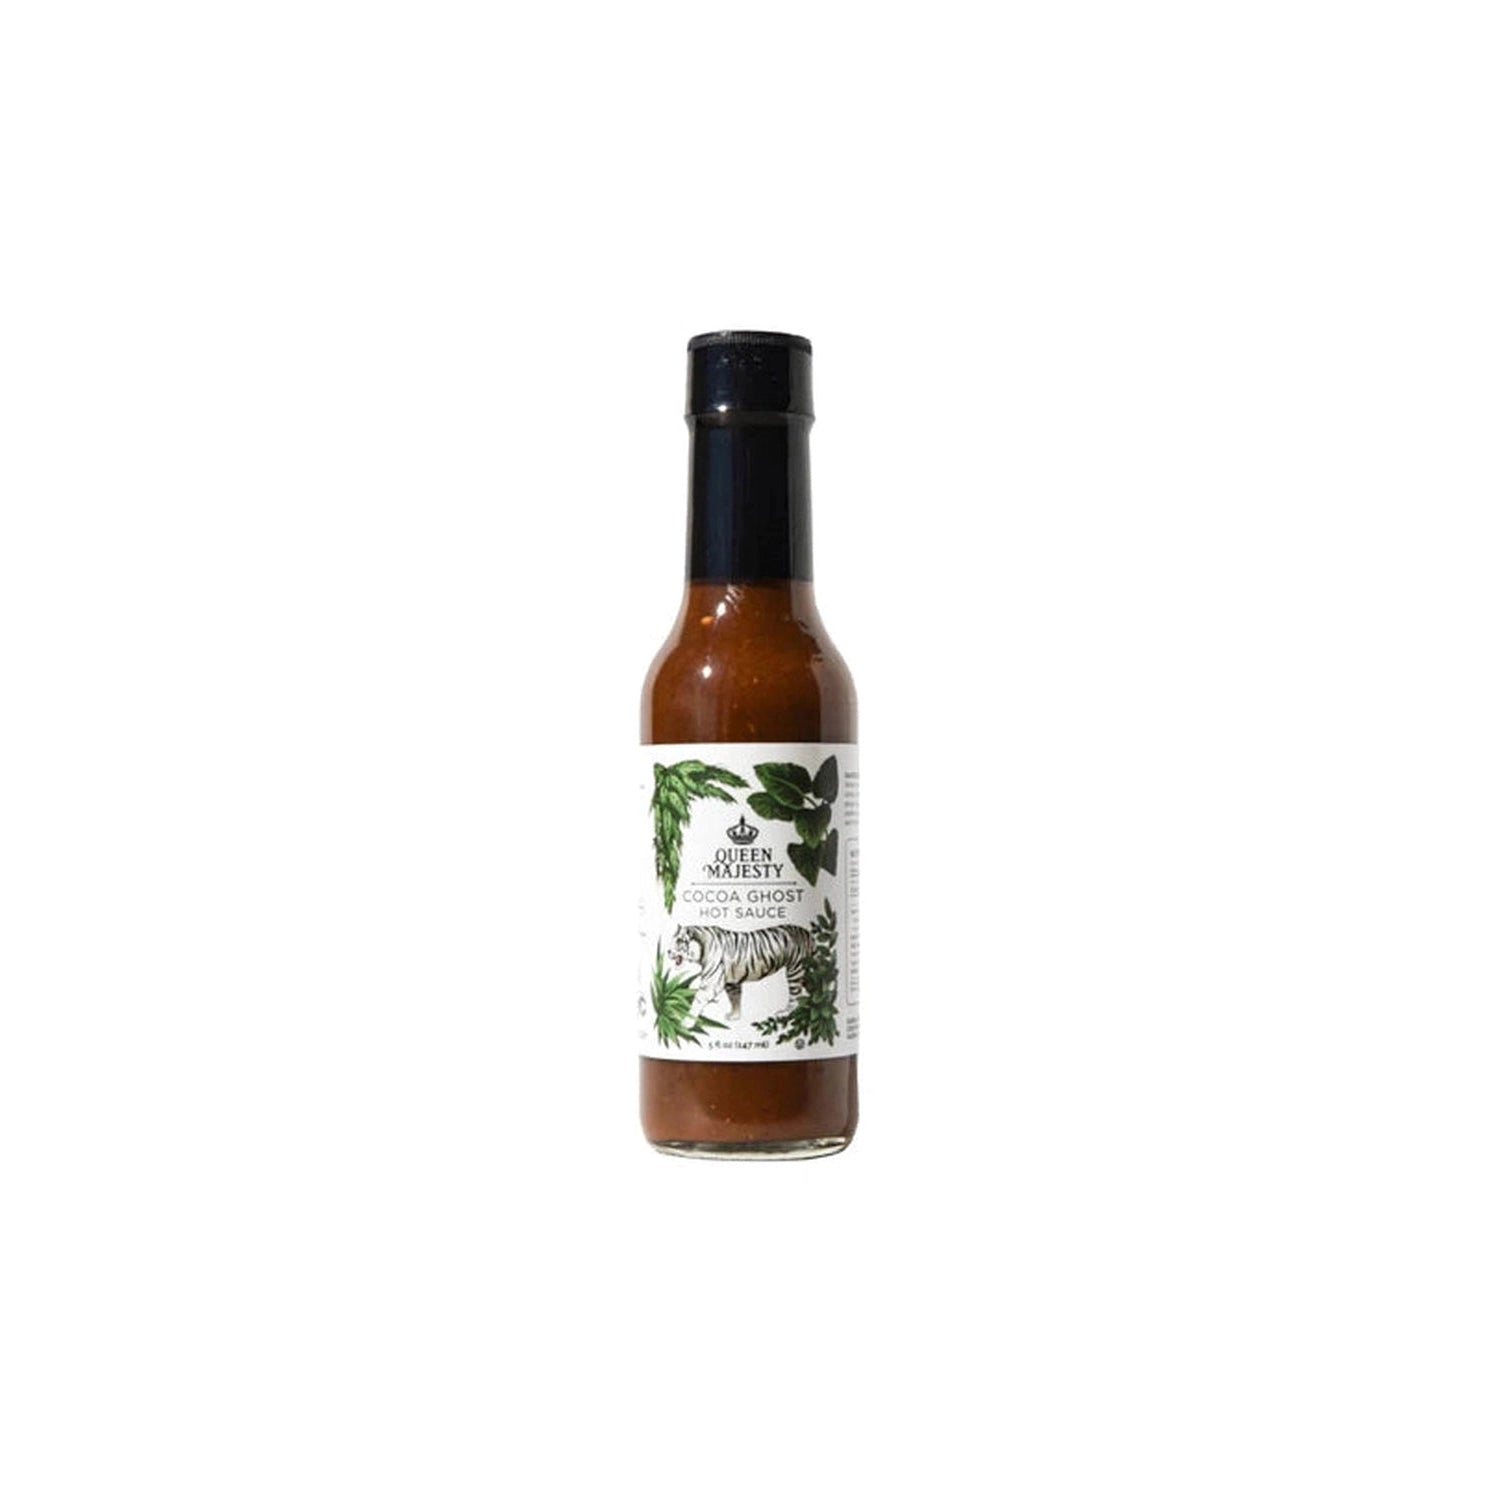 Queen Majesty Cocoa Ghost Hot Sauce Queen Majesty Chilliwack BBQ Supply